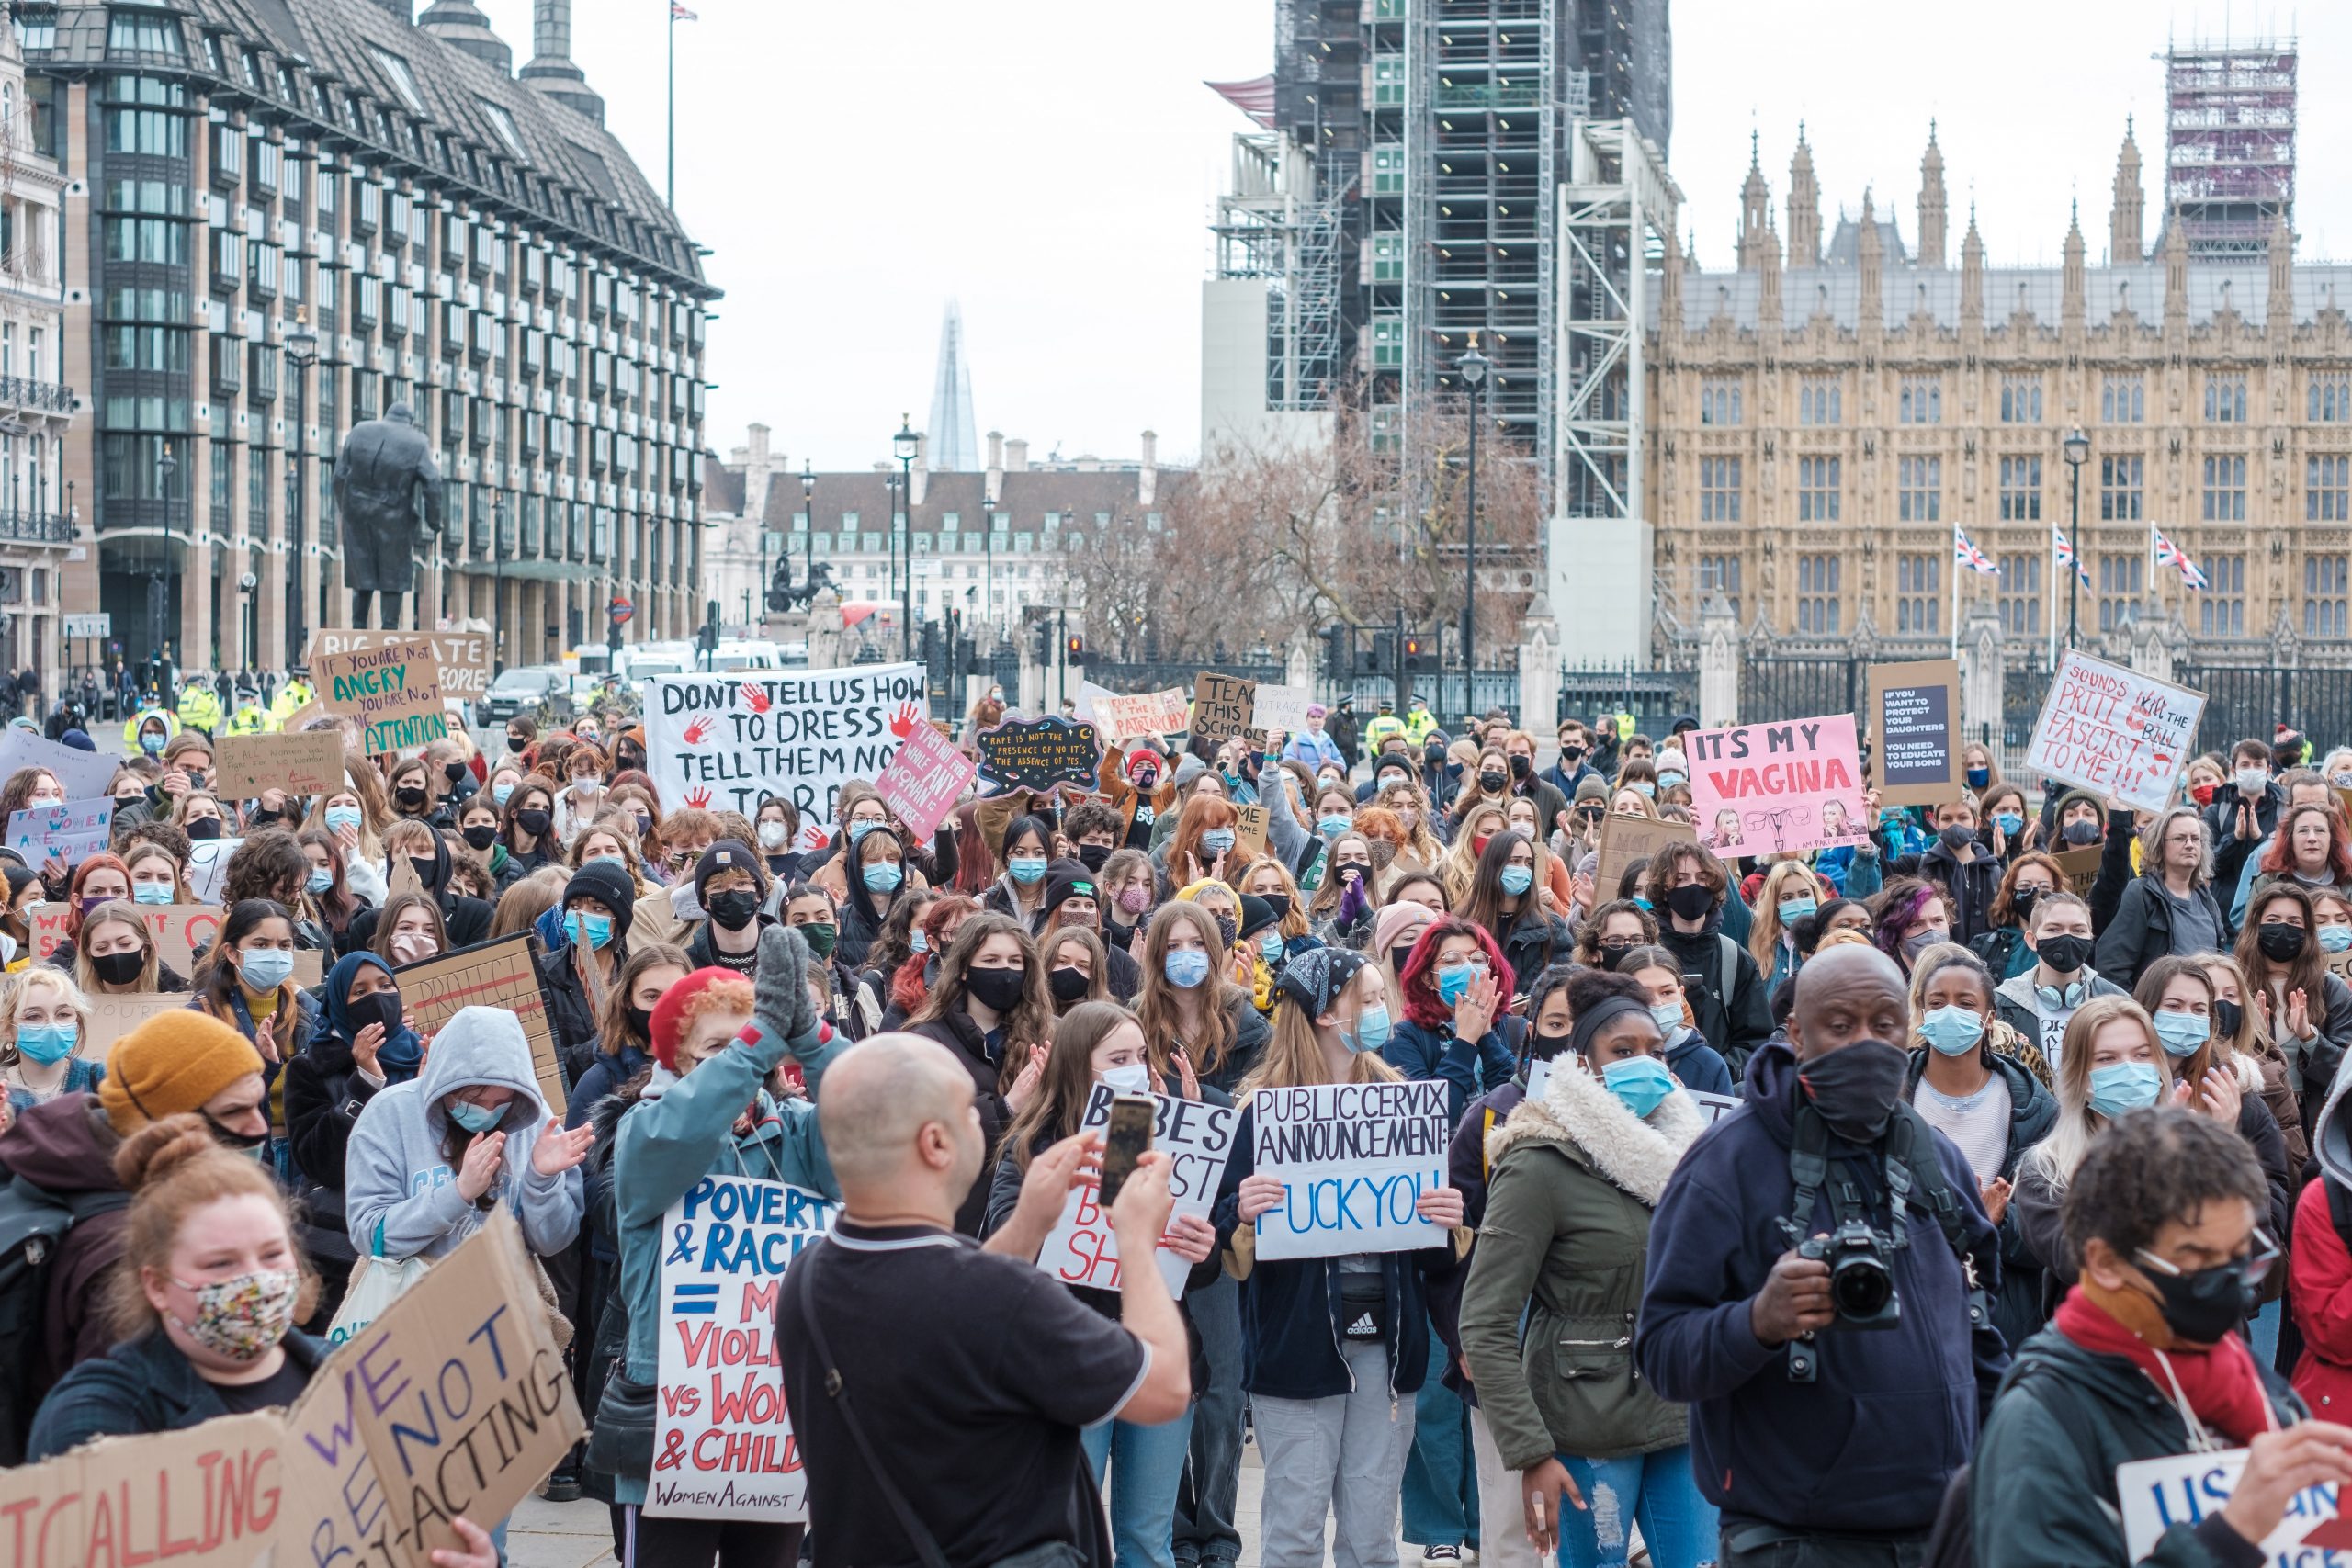 A wide shot of a women's protest in London